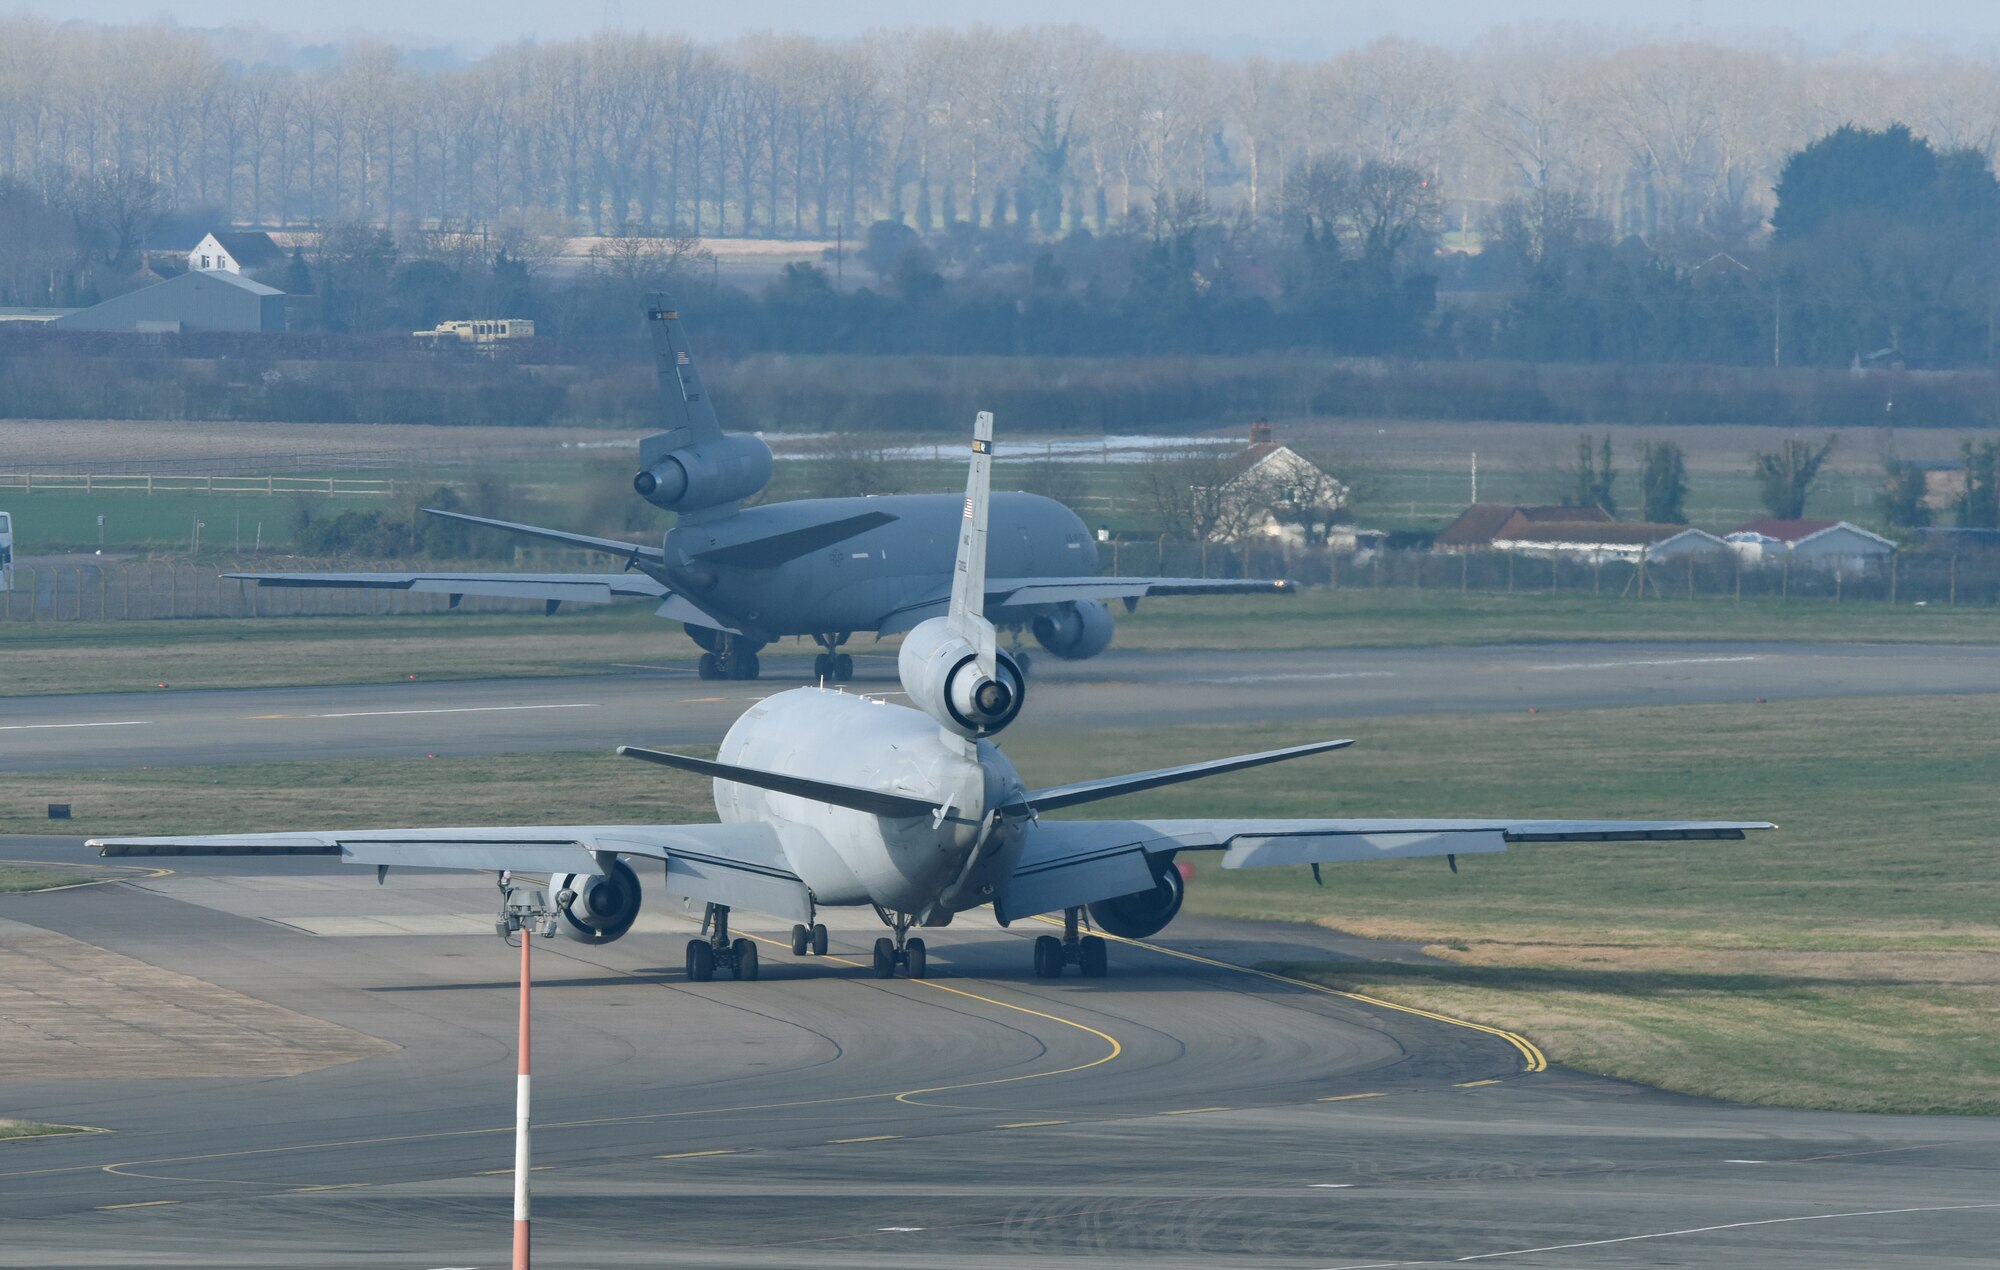 Two U.S. Air Force KC-10 Extender aircraft assigned to the 305th Air Mobility Wing, Joint Base McGuire-Dix-Lakehurst, N.J., prepare to take off at Royal Air Force Mildenhall, England, March 10, 2022. The KC-10 is an Air Mobility Command advanced tanker and cargo aircraft designed to provide increased global mobility for U.S. Armed Forces. (U.S. Air Force photo by Karen Abeyasekere)